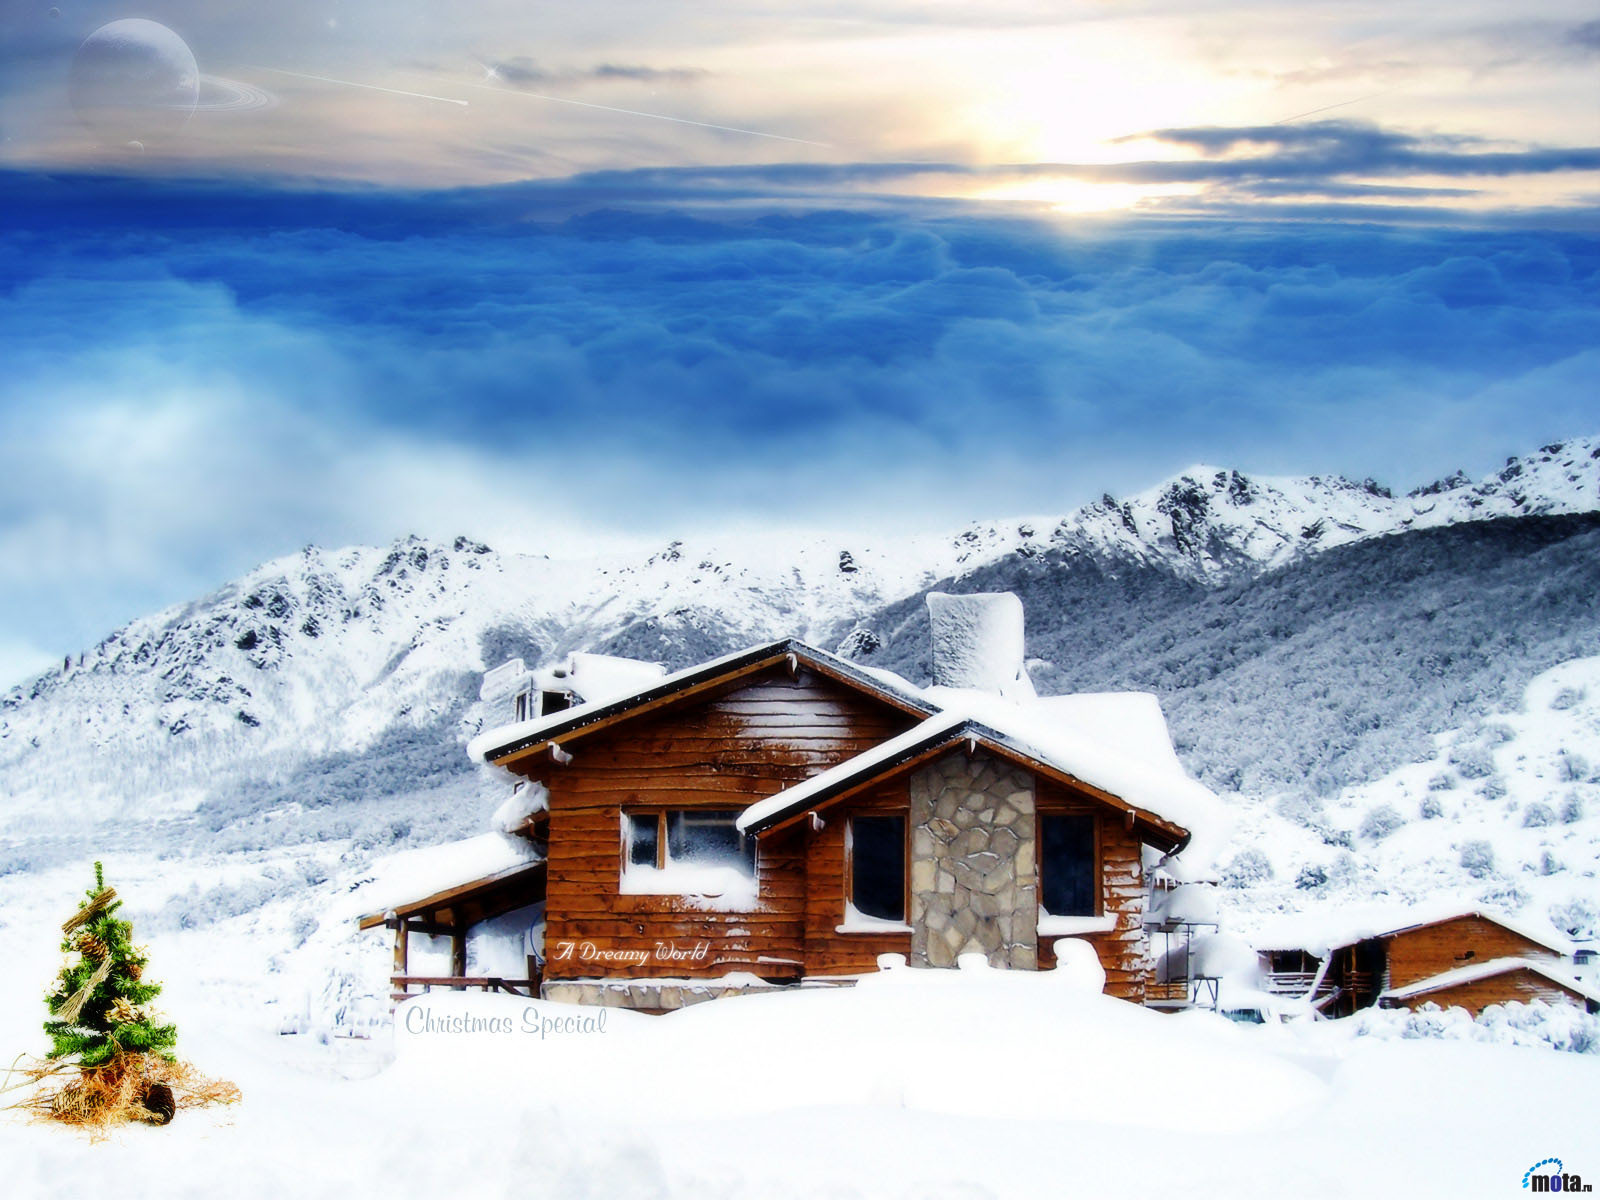 Snowy Cottages Wallpapers